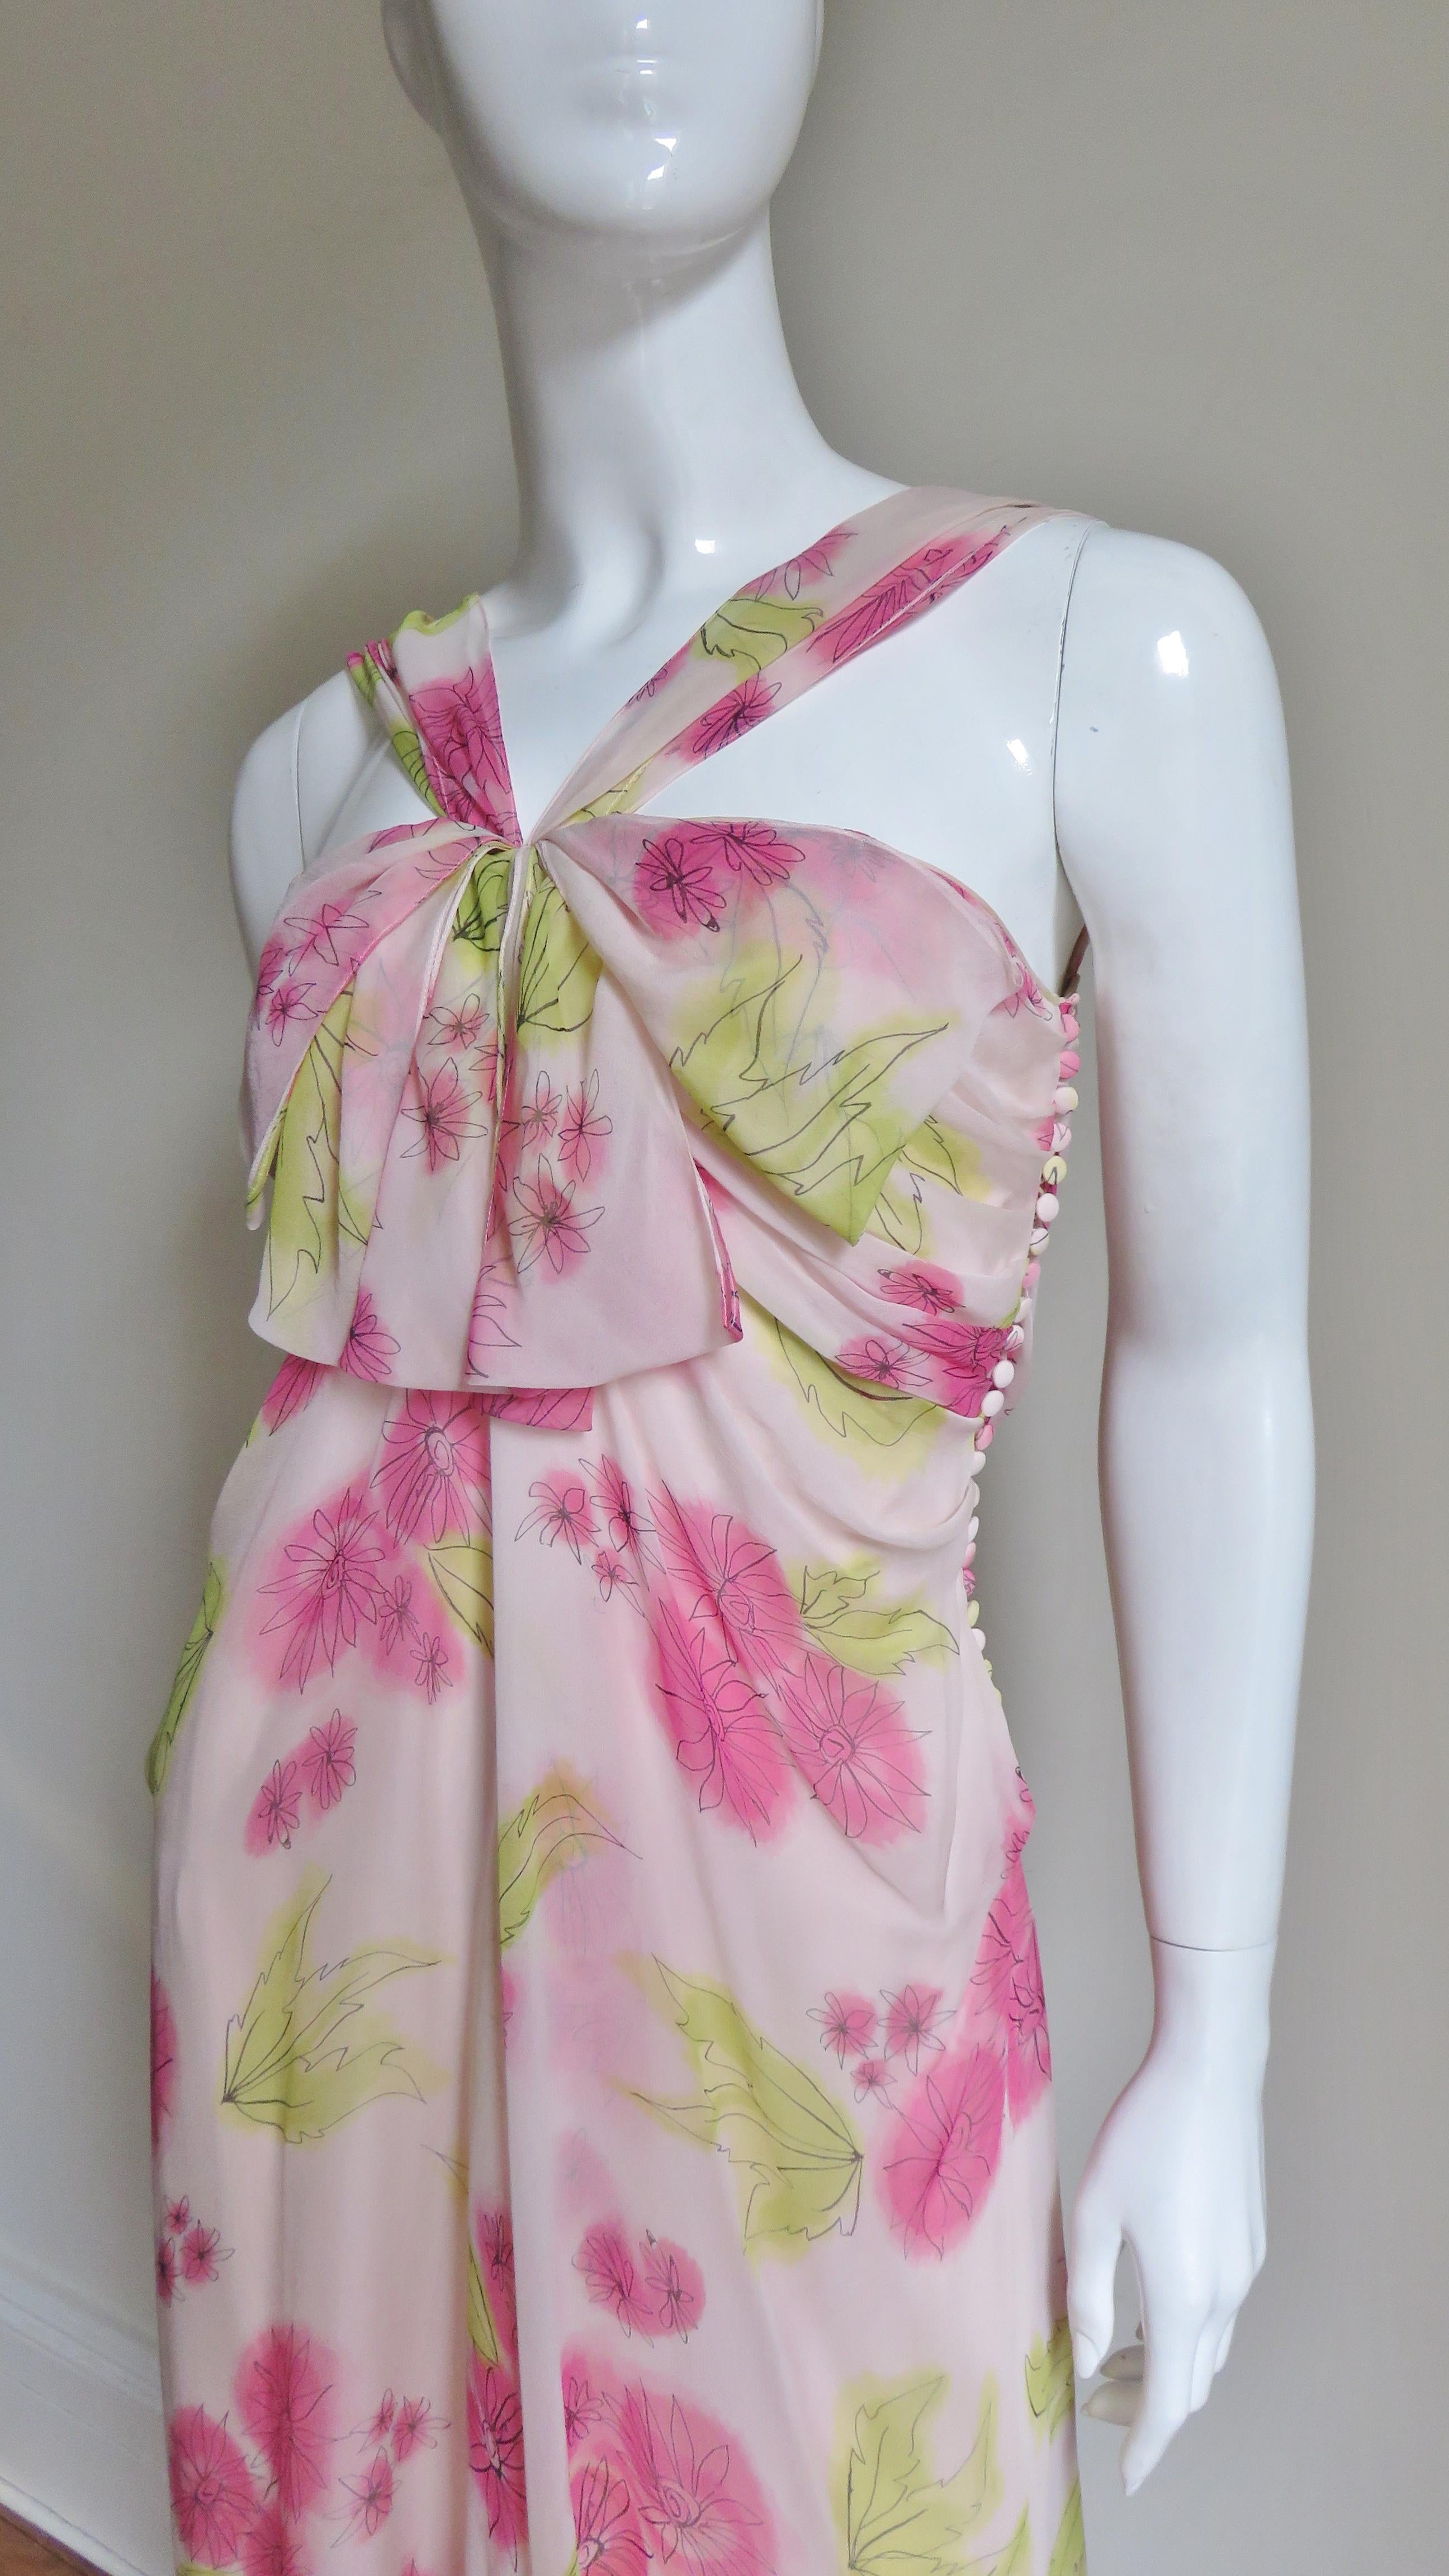 A beautiful blush pink silk dress with green and bright pink flowers by John Galliano for Christian Dior.  It has ruched straps forming a front V, the skirt falls in gentle folds to the hem and there are the signature Dior self covered buttons and